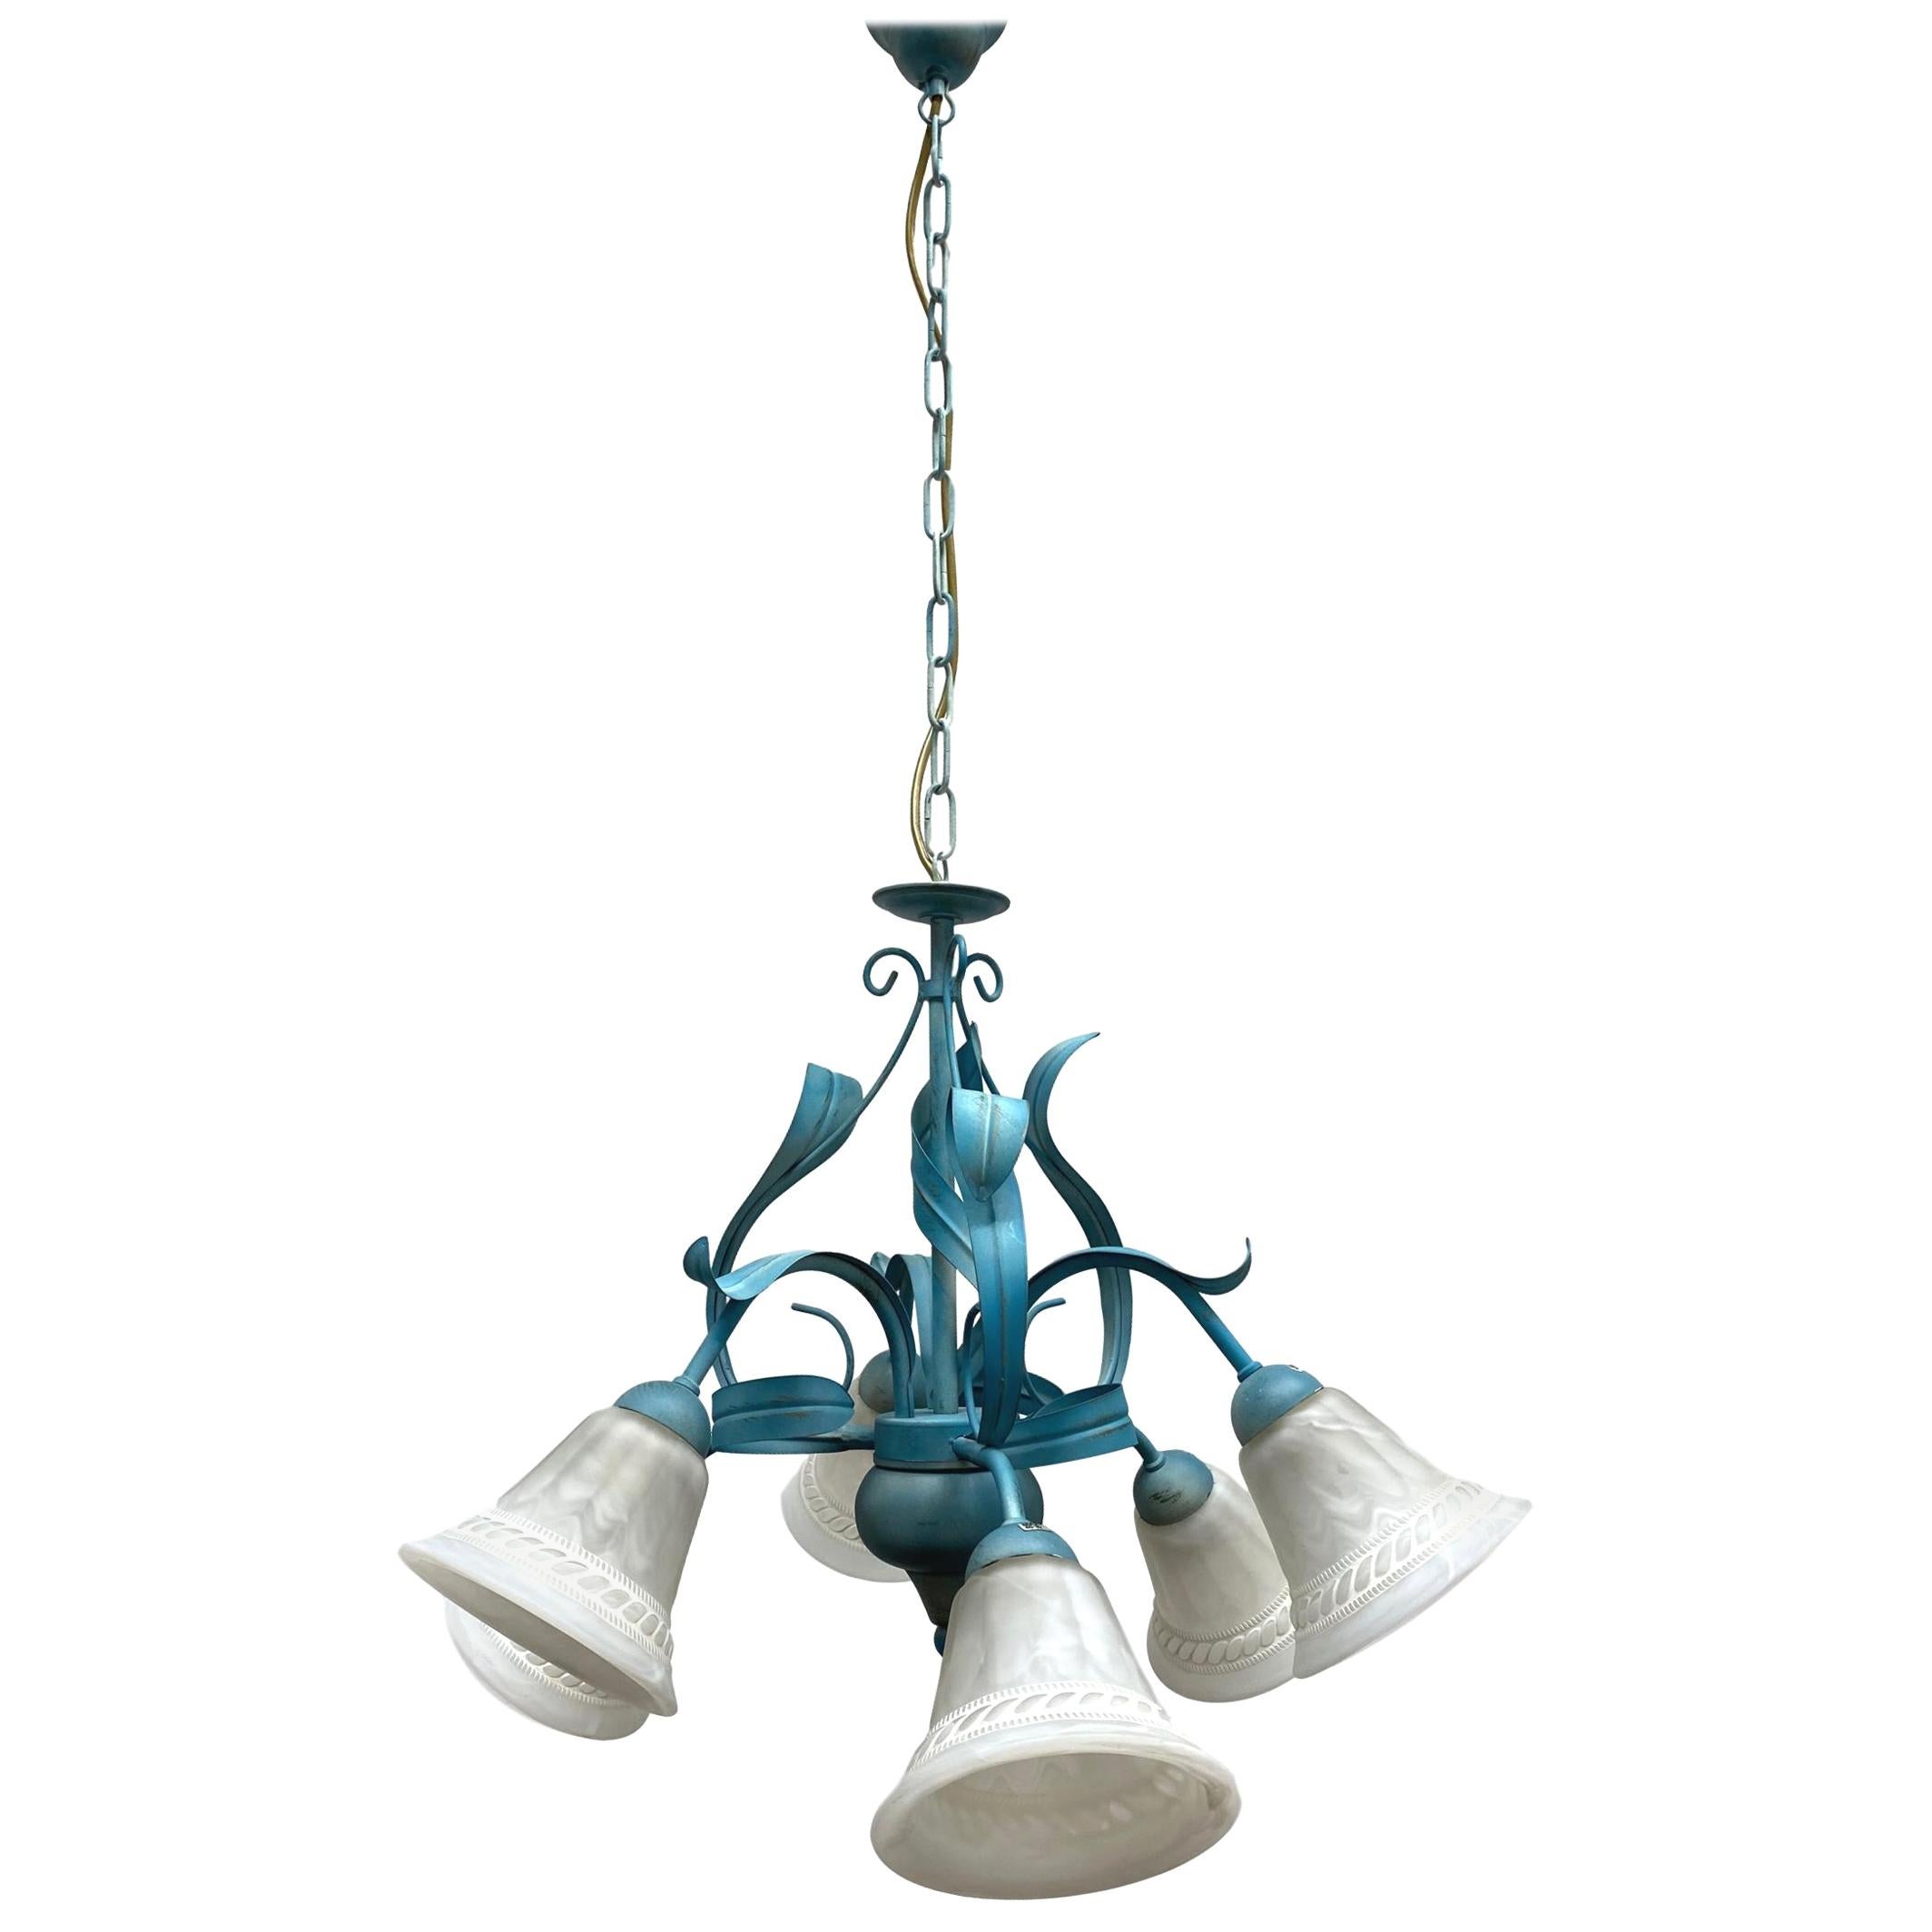 Tuscany Style Chandelier Pendant Light Glass & Blue Colored Metal, 1980s, Italy For Sale